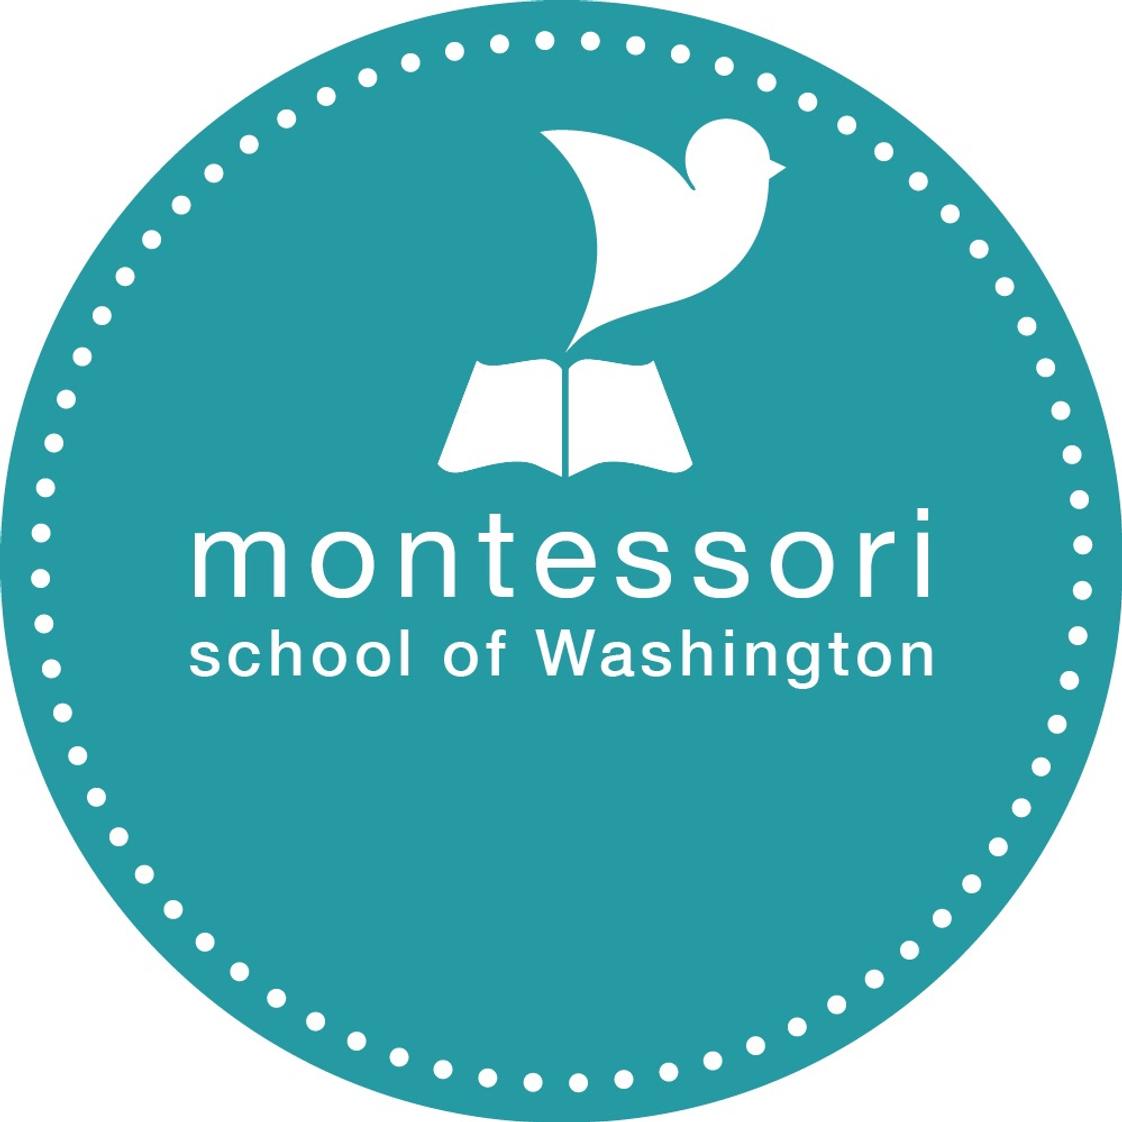 Montessori School Of Washington DC Photo #1 - The Montessori Schoolof Washington is a small, nurturing environment for children ages two to six, where the curriculum is based on the philosophy of Dr. Maria Montessori